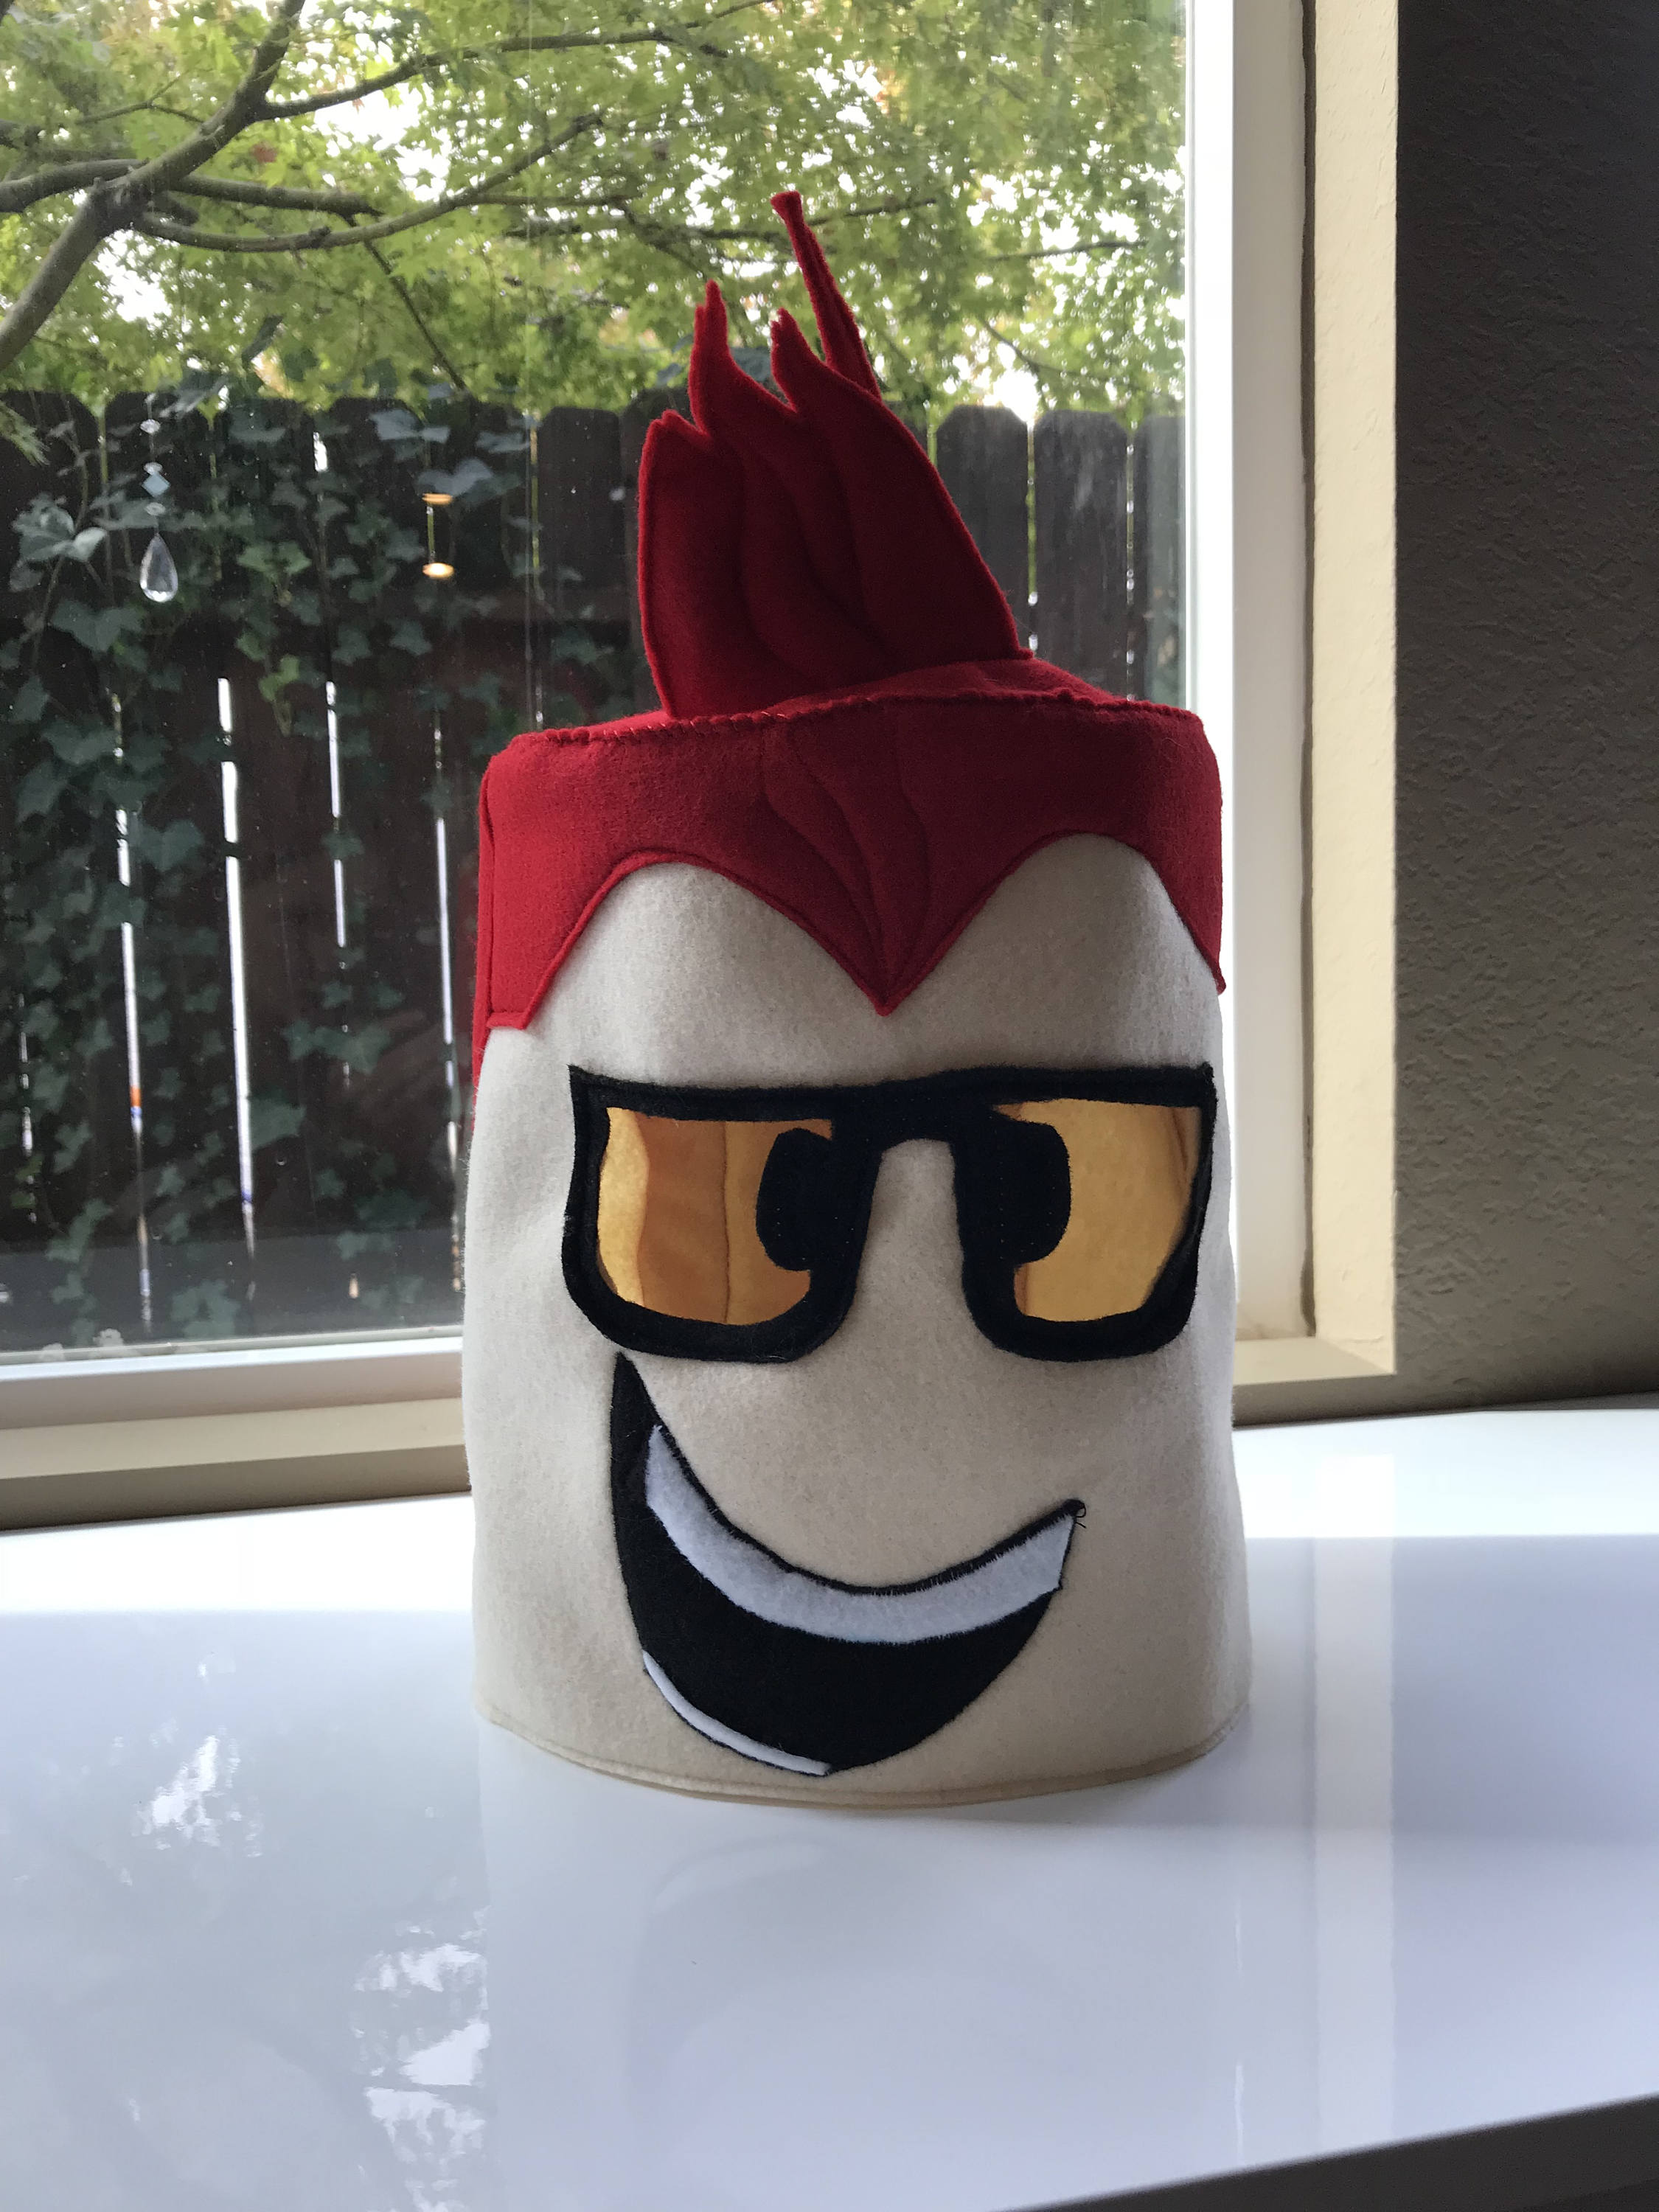 Roblox Head Mask Costume for Kids Ages 4 CUSTOM Mouth/ Skin/ 